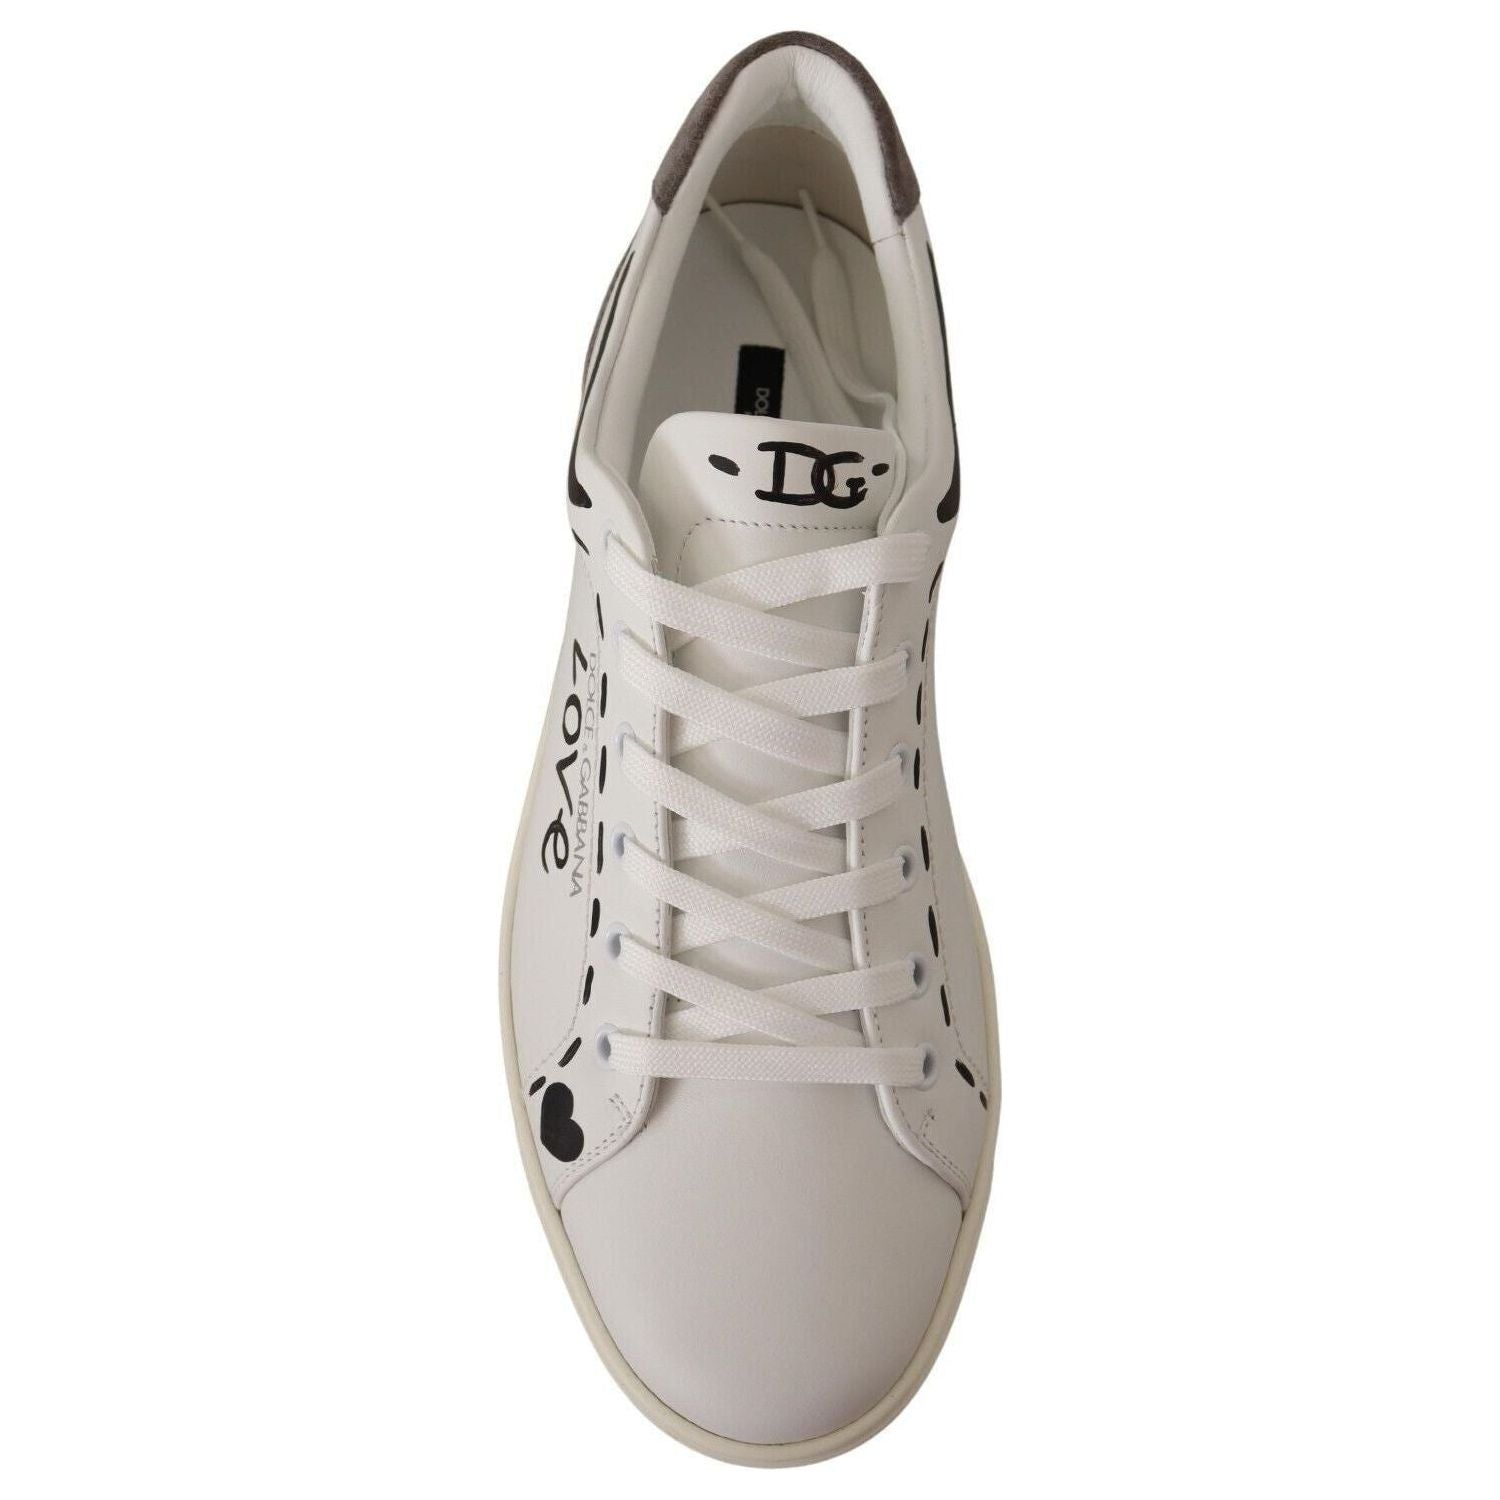 Dolce & Gabbana | White Leather Gray LOVE Casual Sneakers Shoes  | McRichard Designer Brands